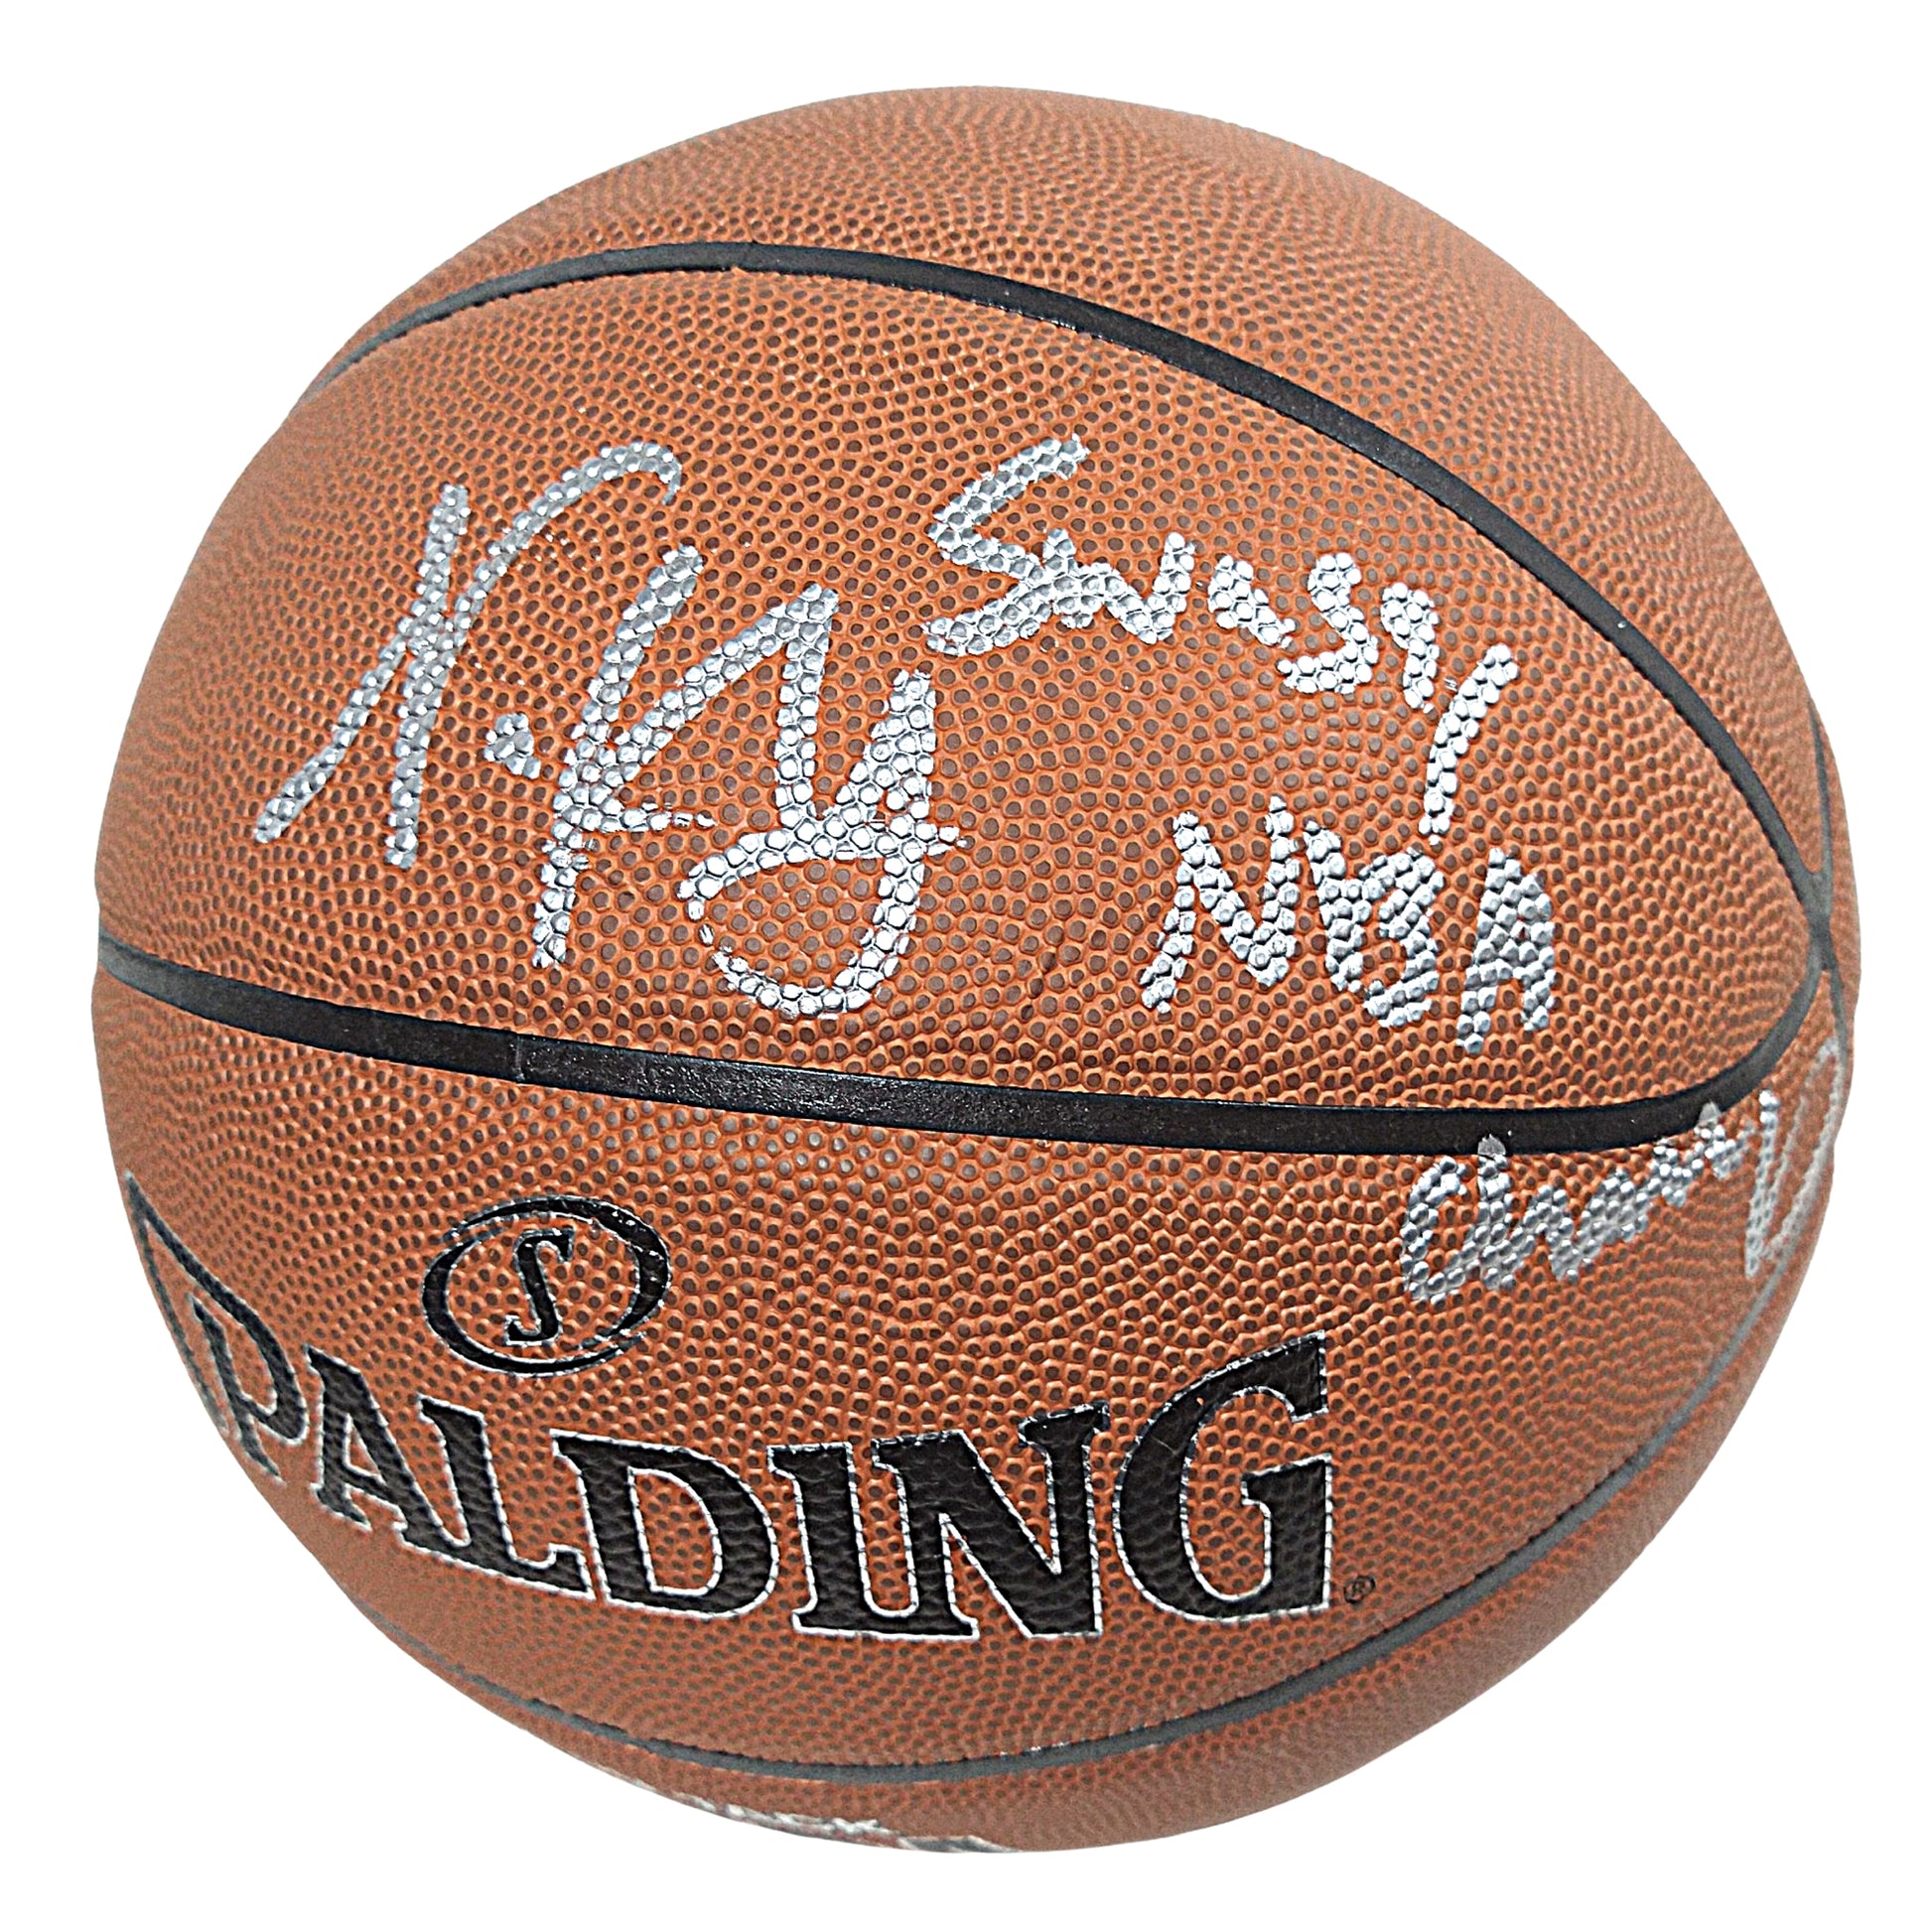 Basketballs- Autographed- Nick Young Signed NBA Basketball with NBA Champs Inscription - Golden State Warriors - USC Trojans - Exact Proof - Beckett BAS Authentication 104